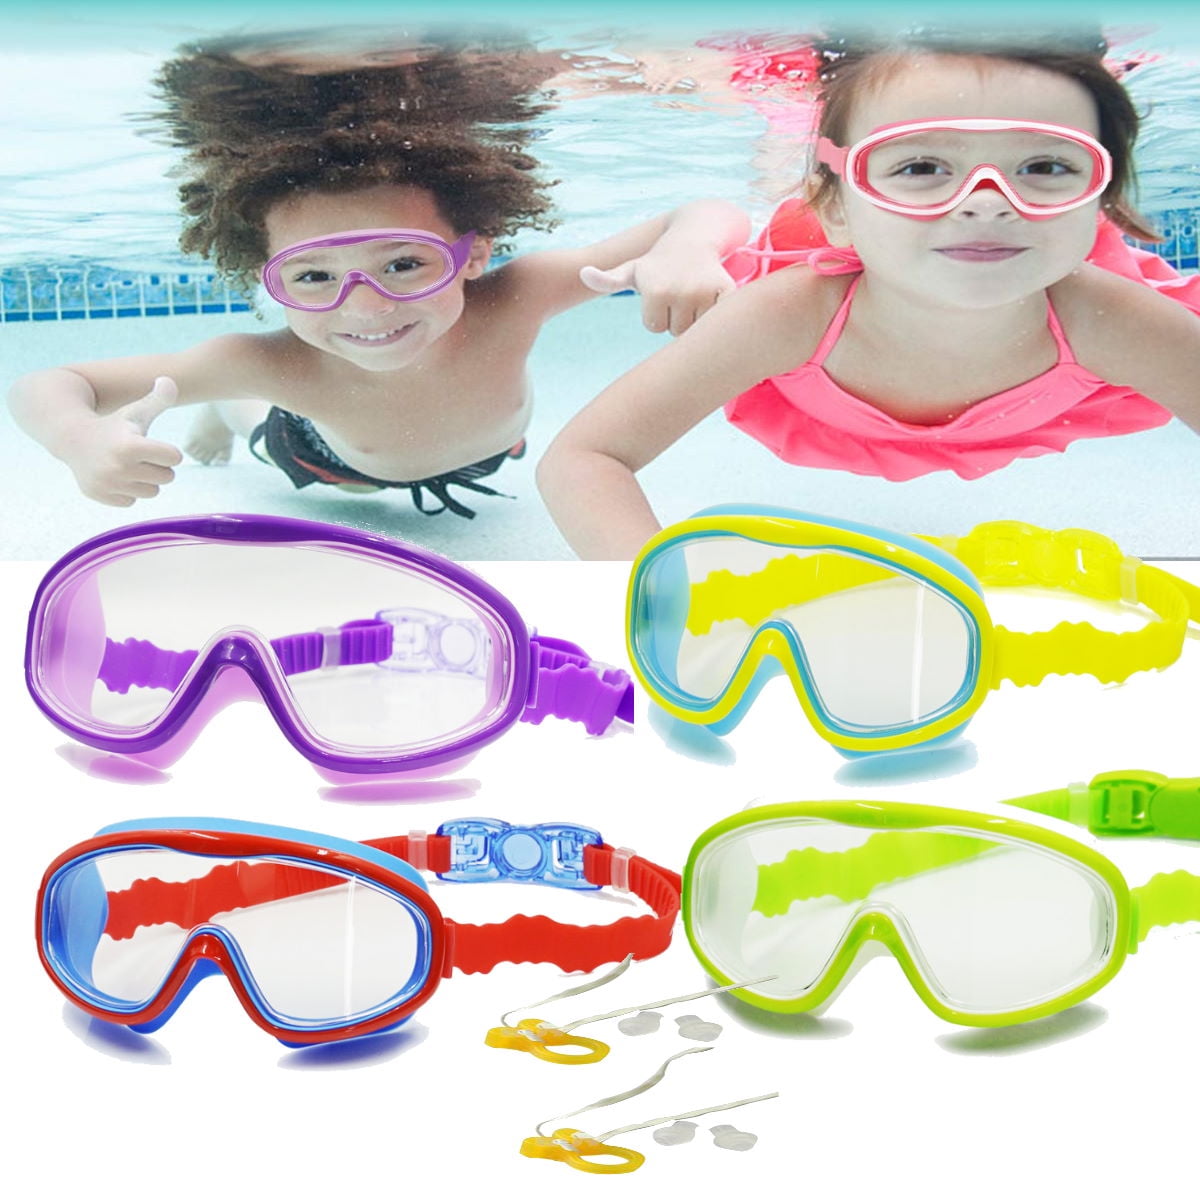 Boys and Girls Fun Colors Snorkeling Swim Bag for Kids Goggles Mask Fins Snorkel 